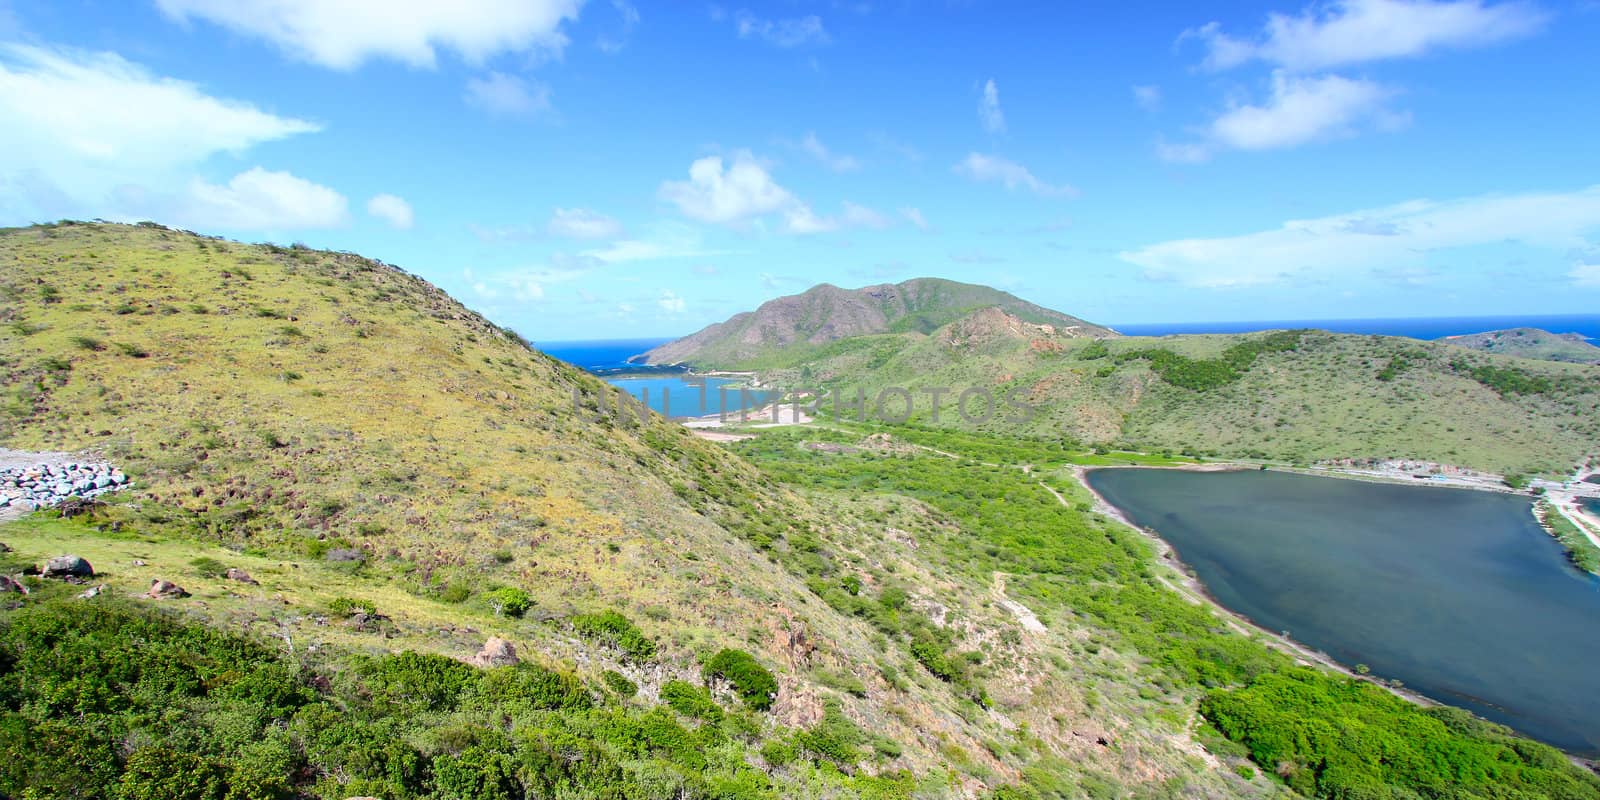 Landscape of Saint Kitts by Wirepec